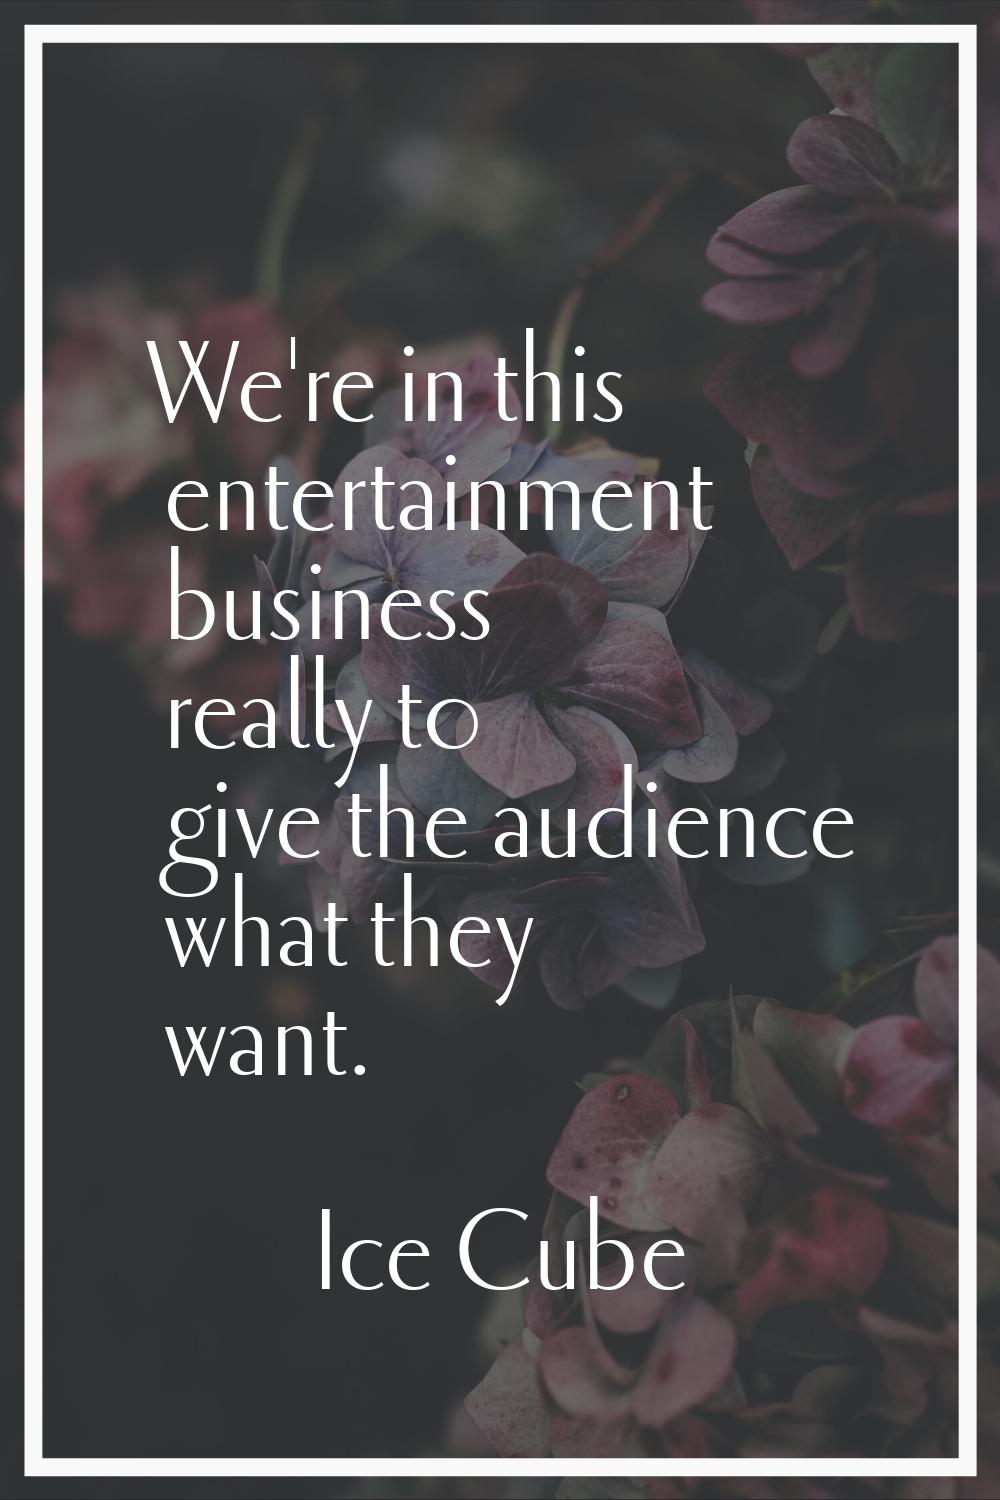 We're in this entertainment business really to give the audience what they want.